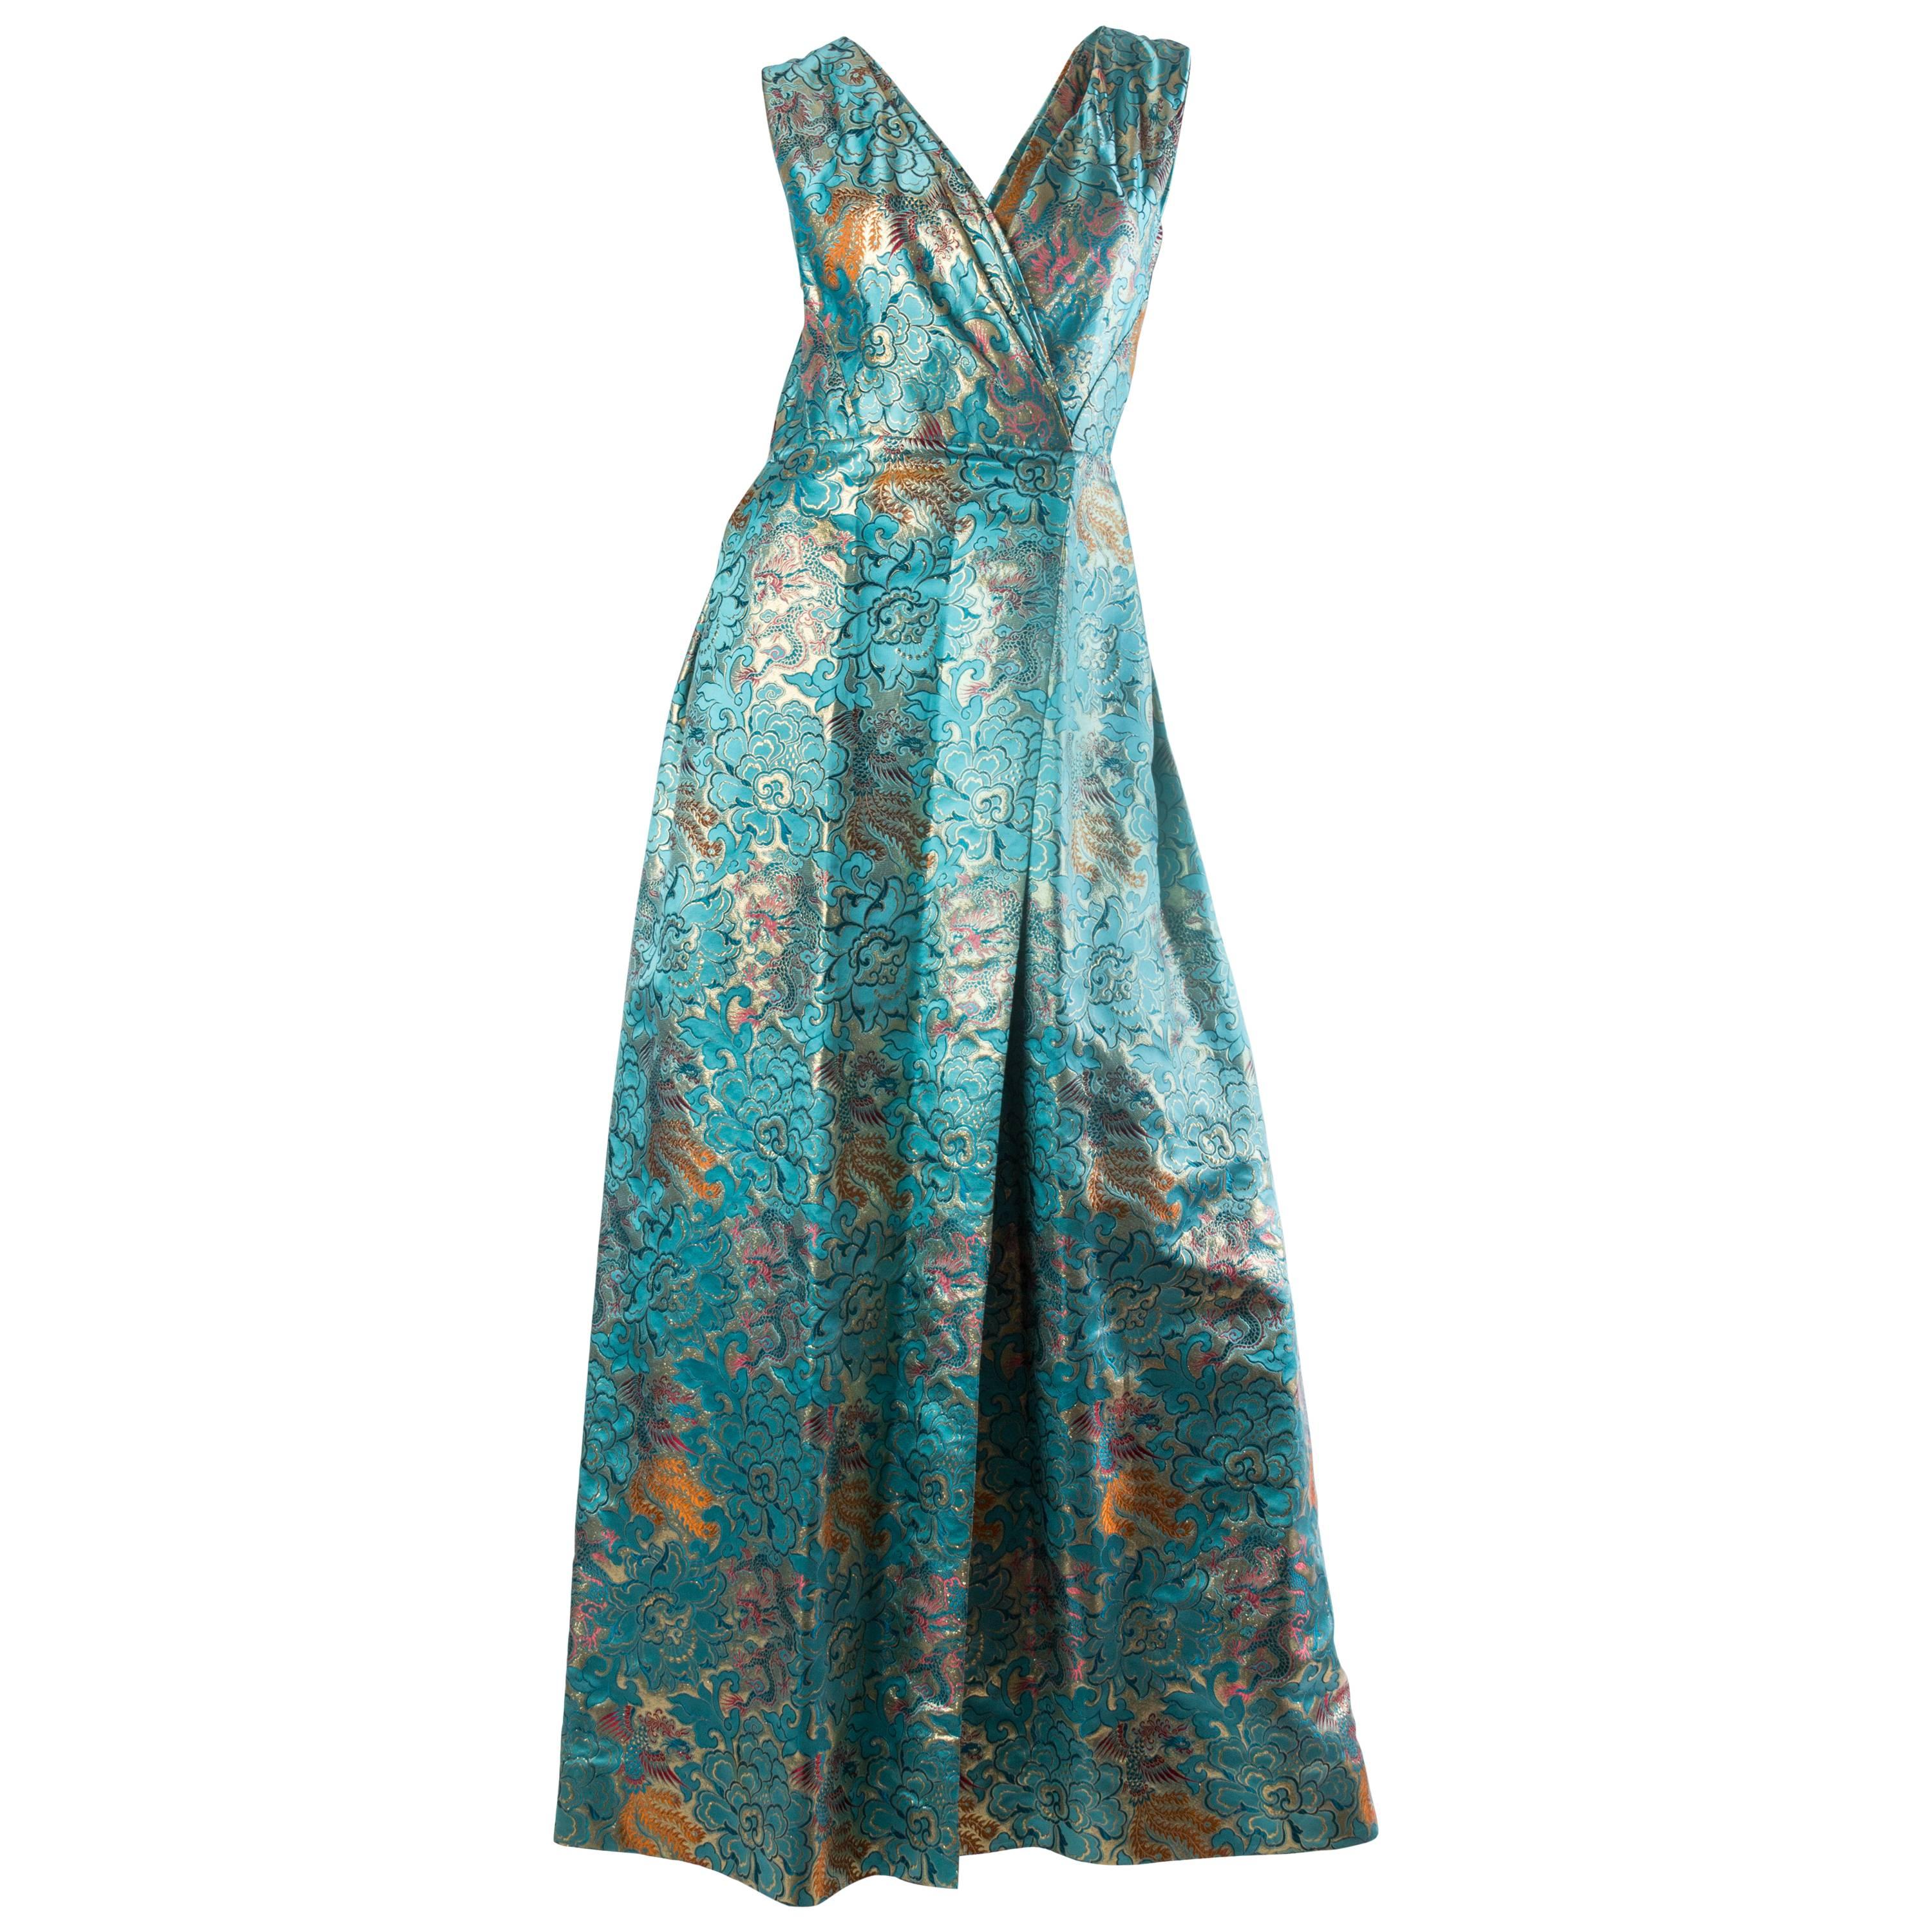 MORPHEW COLLECTION Teal & Gold Asian Dragon And Phoenix Jacquard Reversible Gow